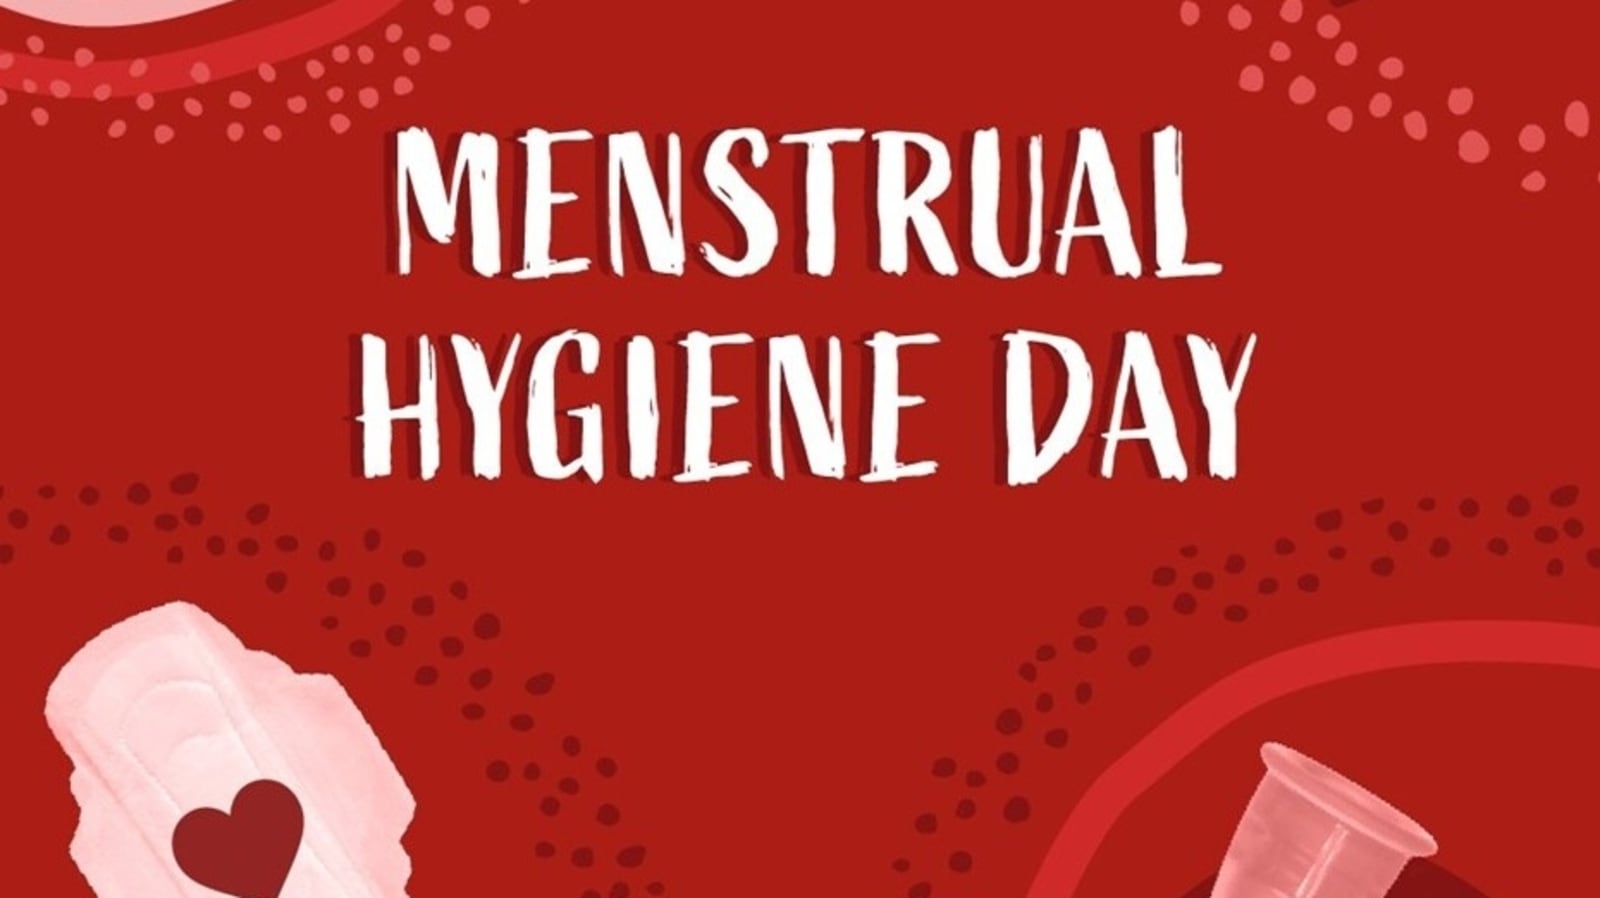 Khana - Today is #MenstrualHygieneDay! To celebrate, our friends